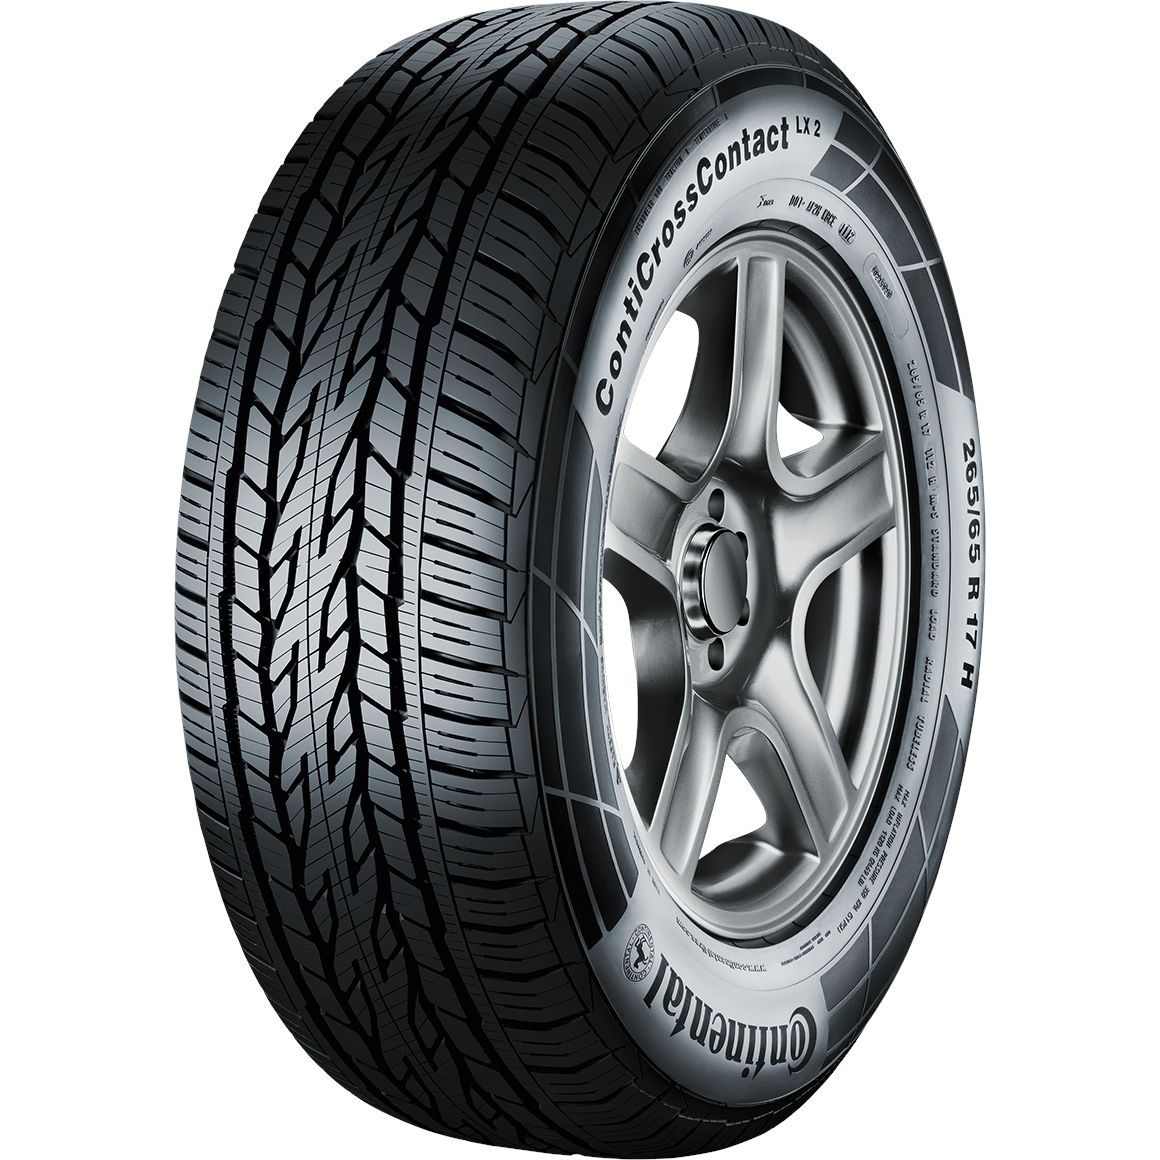 CONTINENTAL 255/70R16 111T ContiCrossContact LX 2 FR BSW M+S